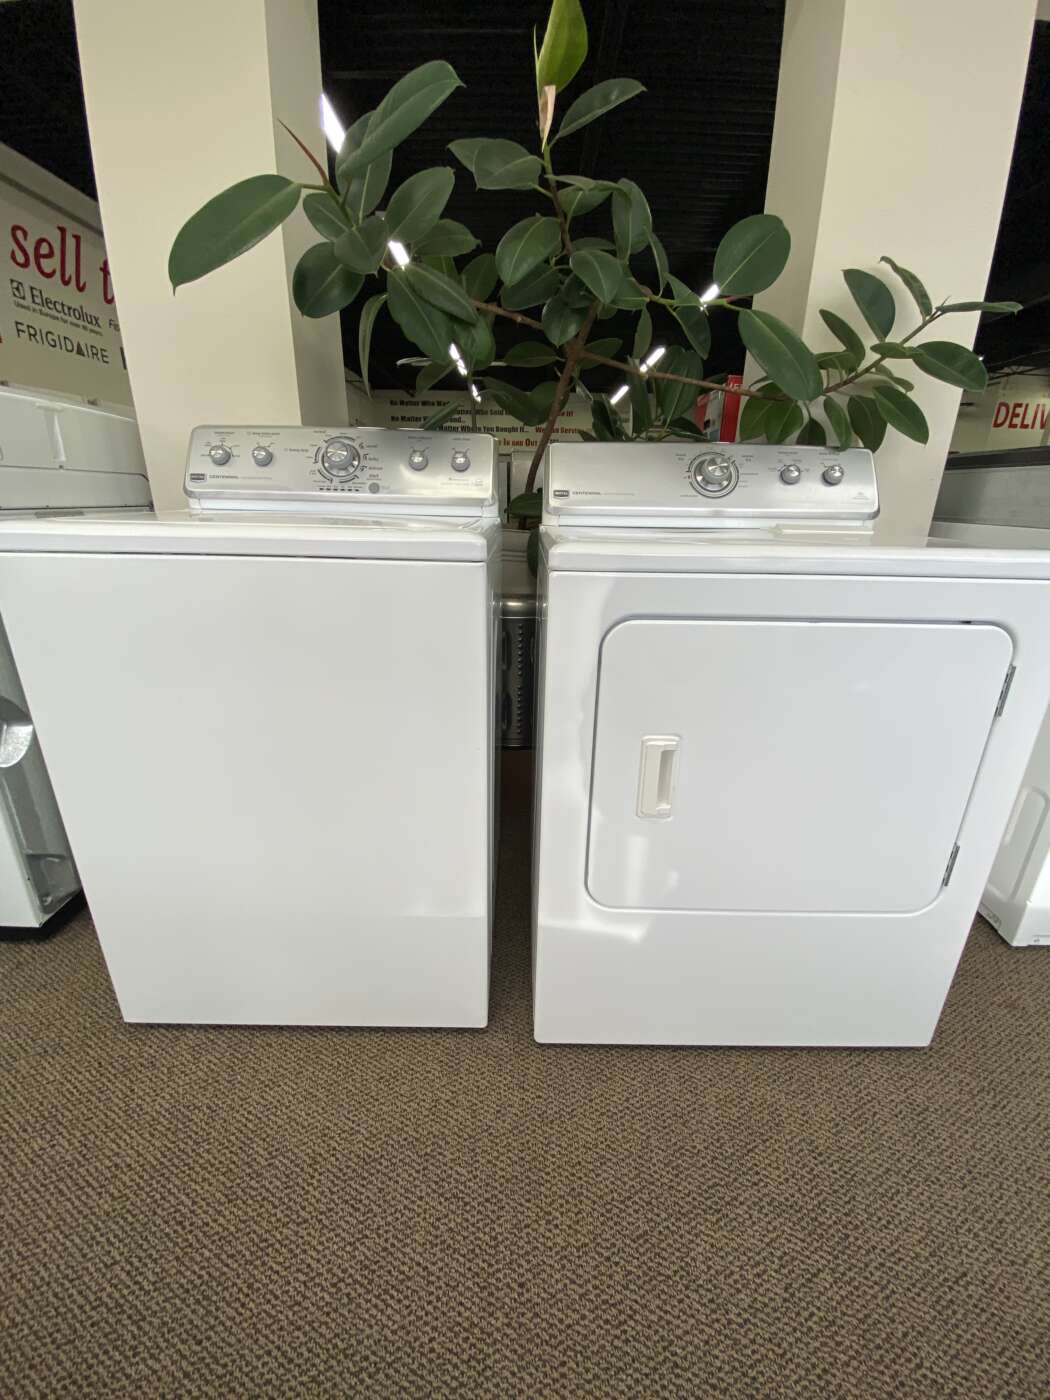 Reconditioned MAYTAG 3.4 Cu. Ft. Top-Load Washer & 7.0 Cu. Ft. Electric Dryer – White